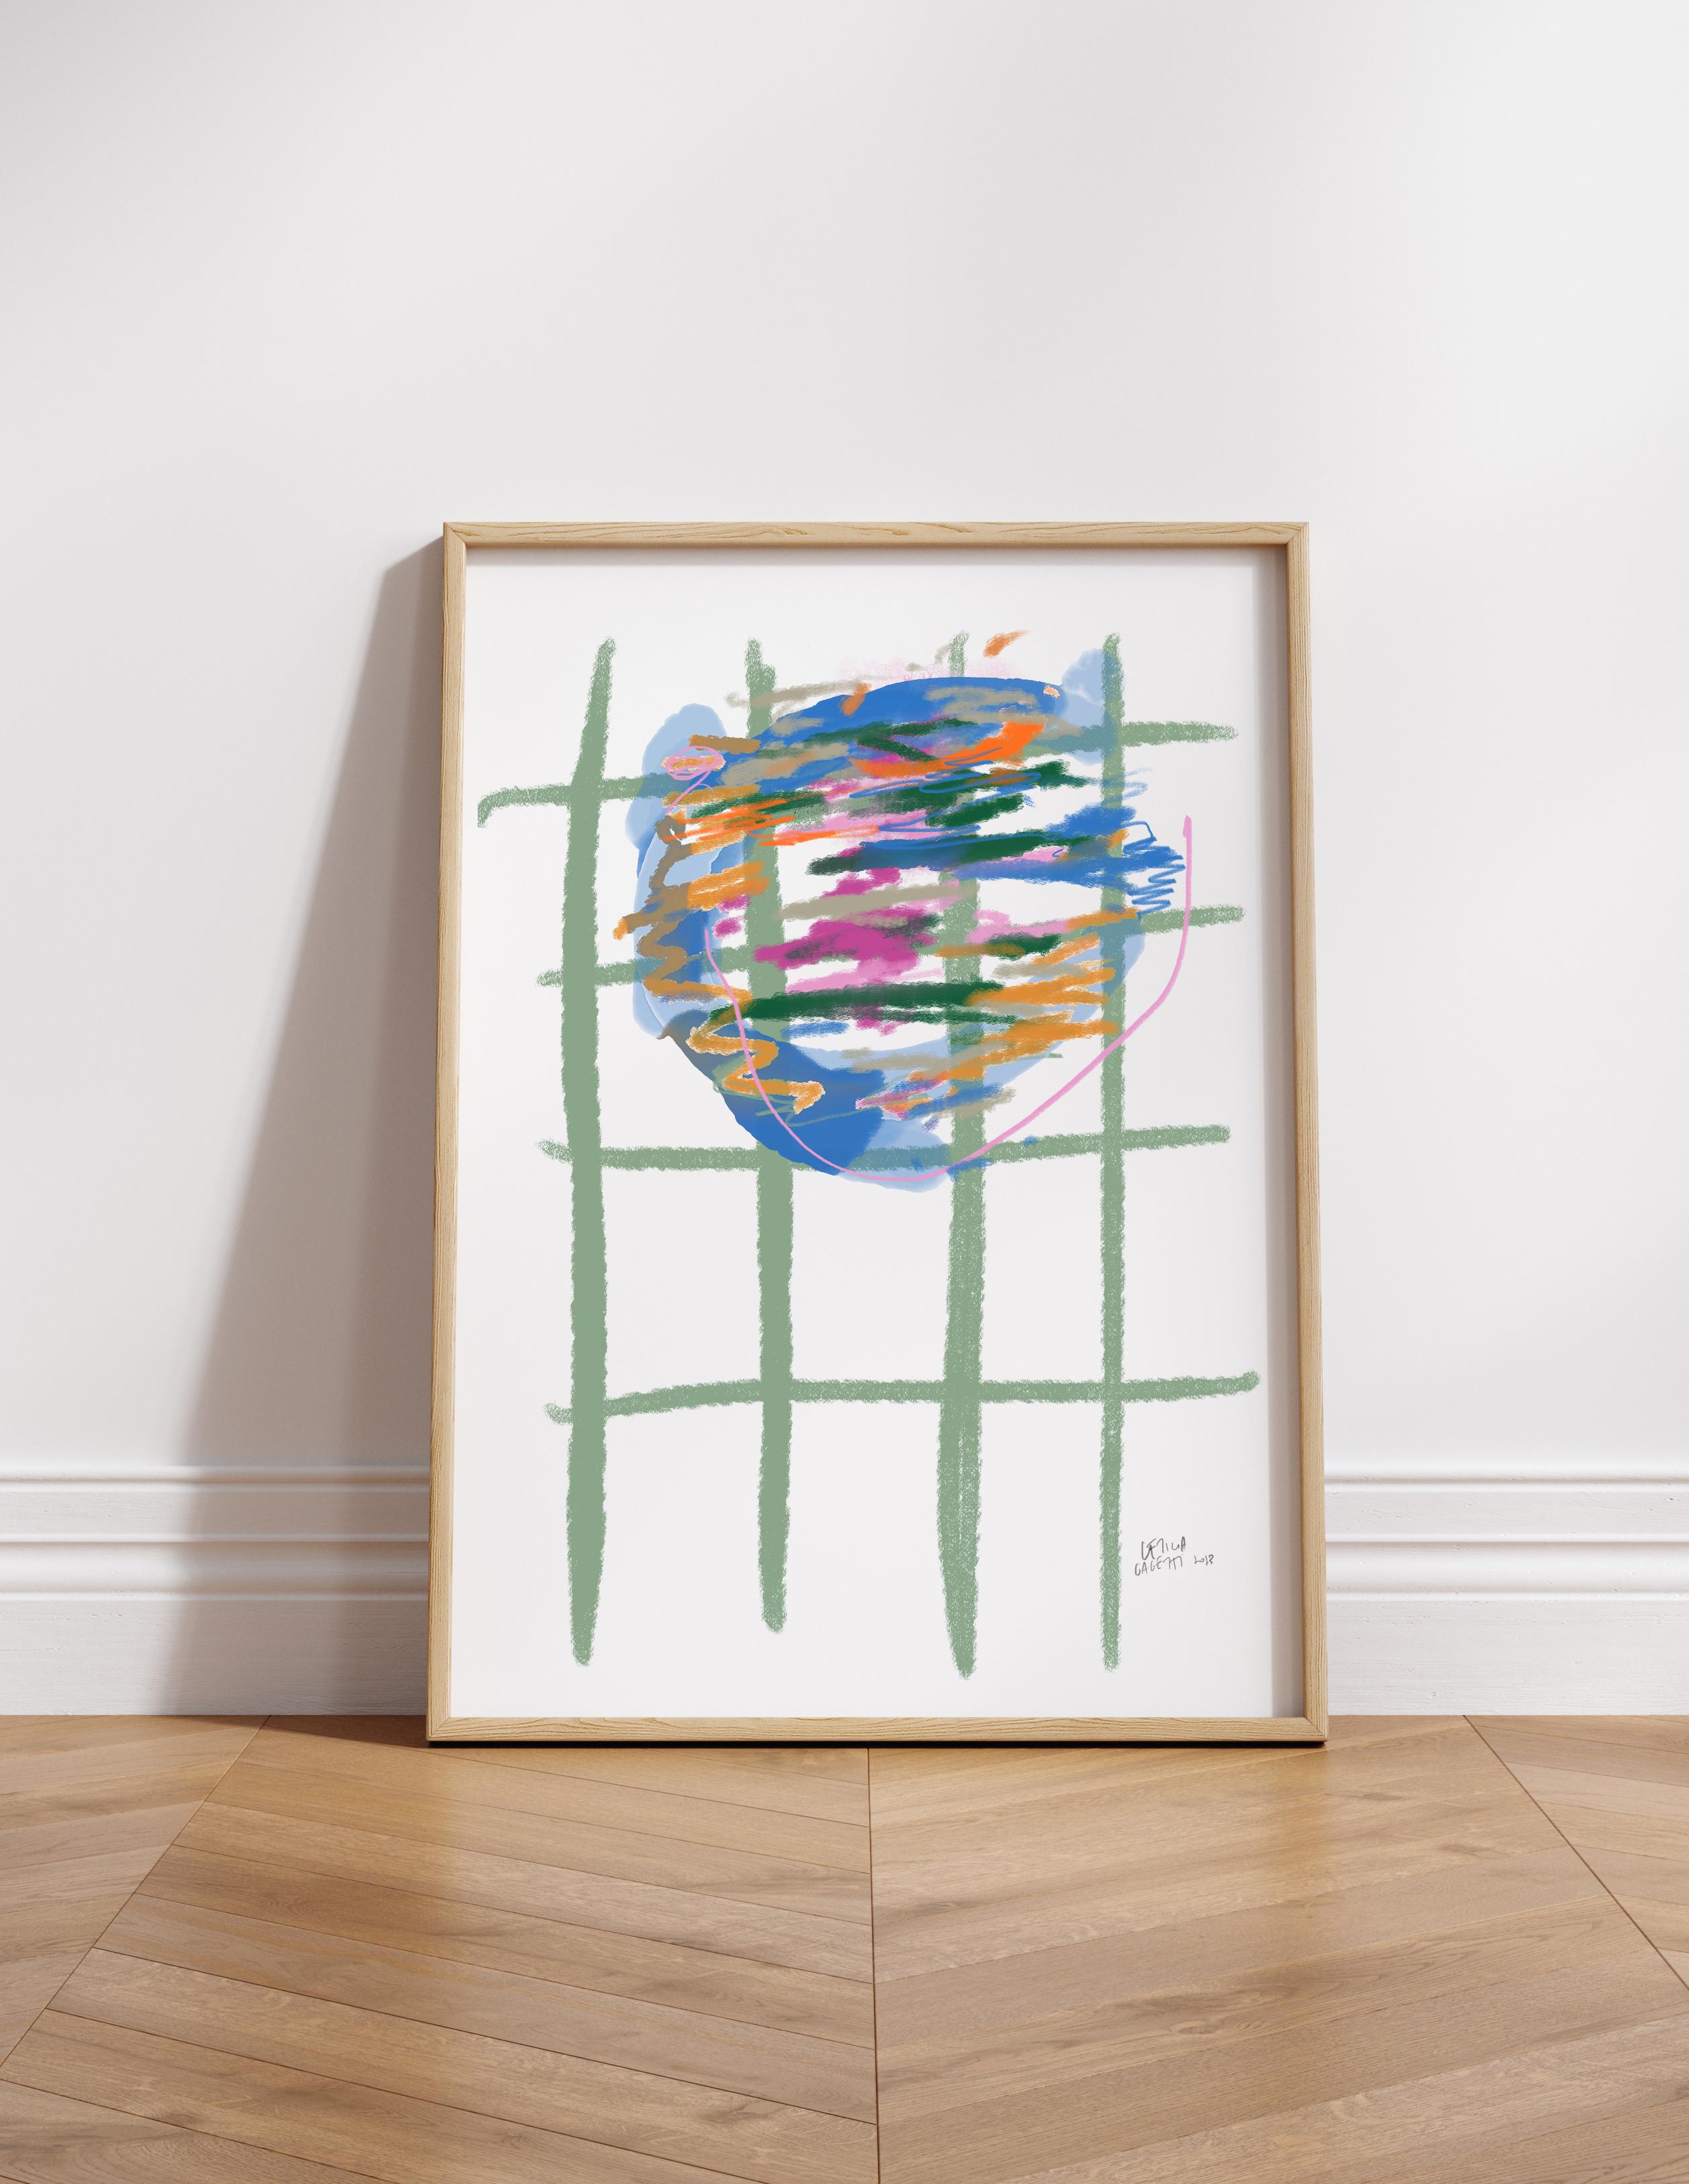 Giclée art print by Leticia Gagetti, printed on 260g high-quality paper with a matte finish that ensures vivid and saturated colors.

Crafted through giclée printing on museum-quality paper, this fine art print utilizes archival inks to capture rich